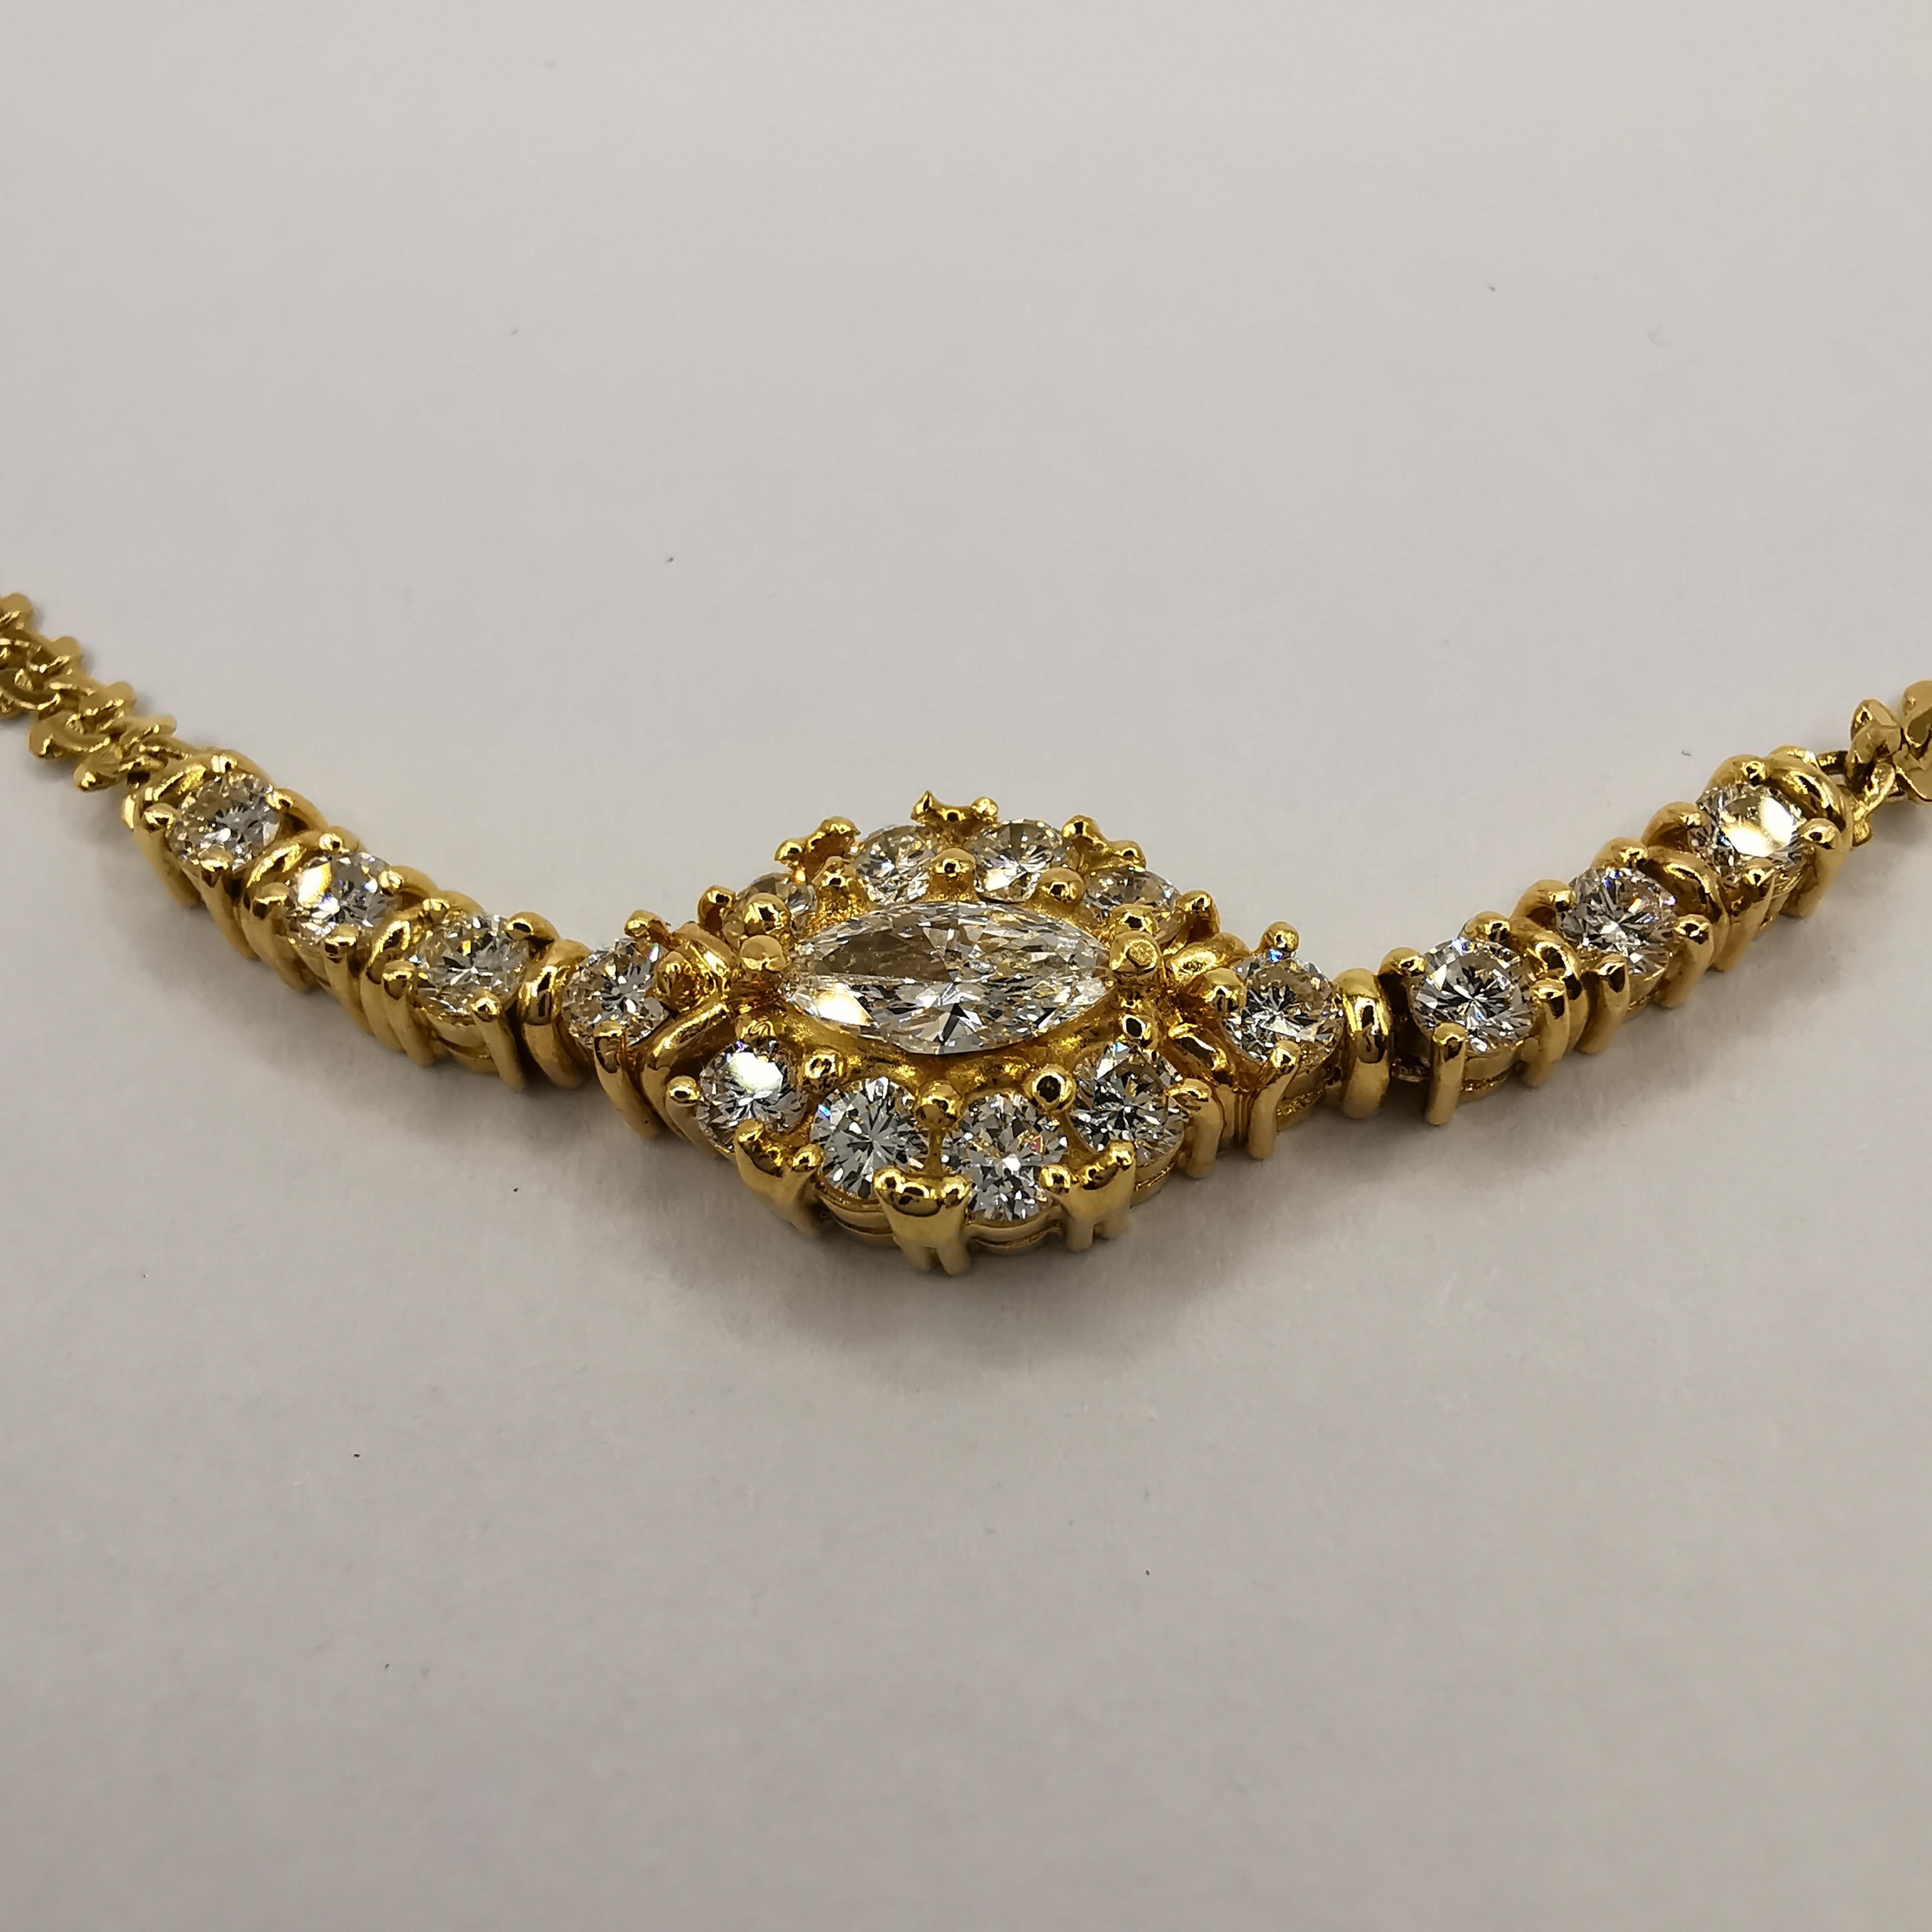 Vintage 2.89ct Marquise Diamond Cluster 18-20k Gold Ring, Earrings, Necklace Set For Sale 10